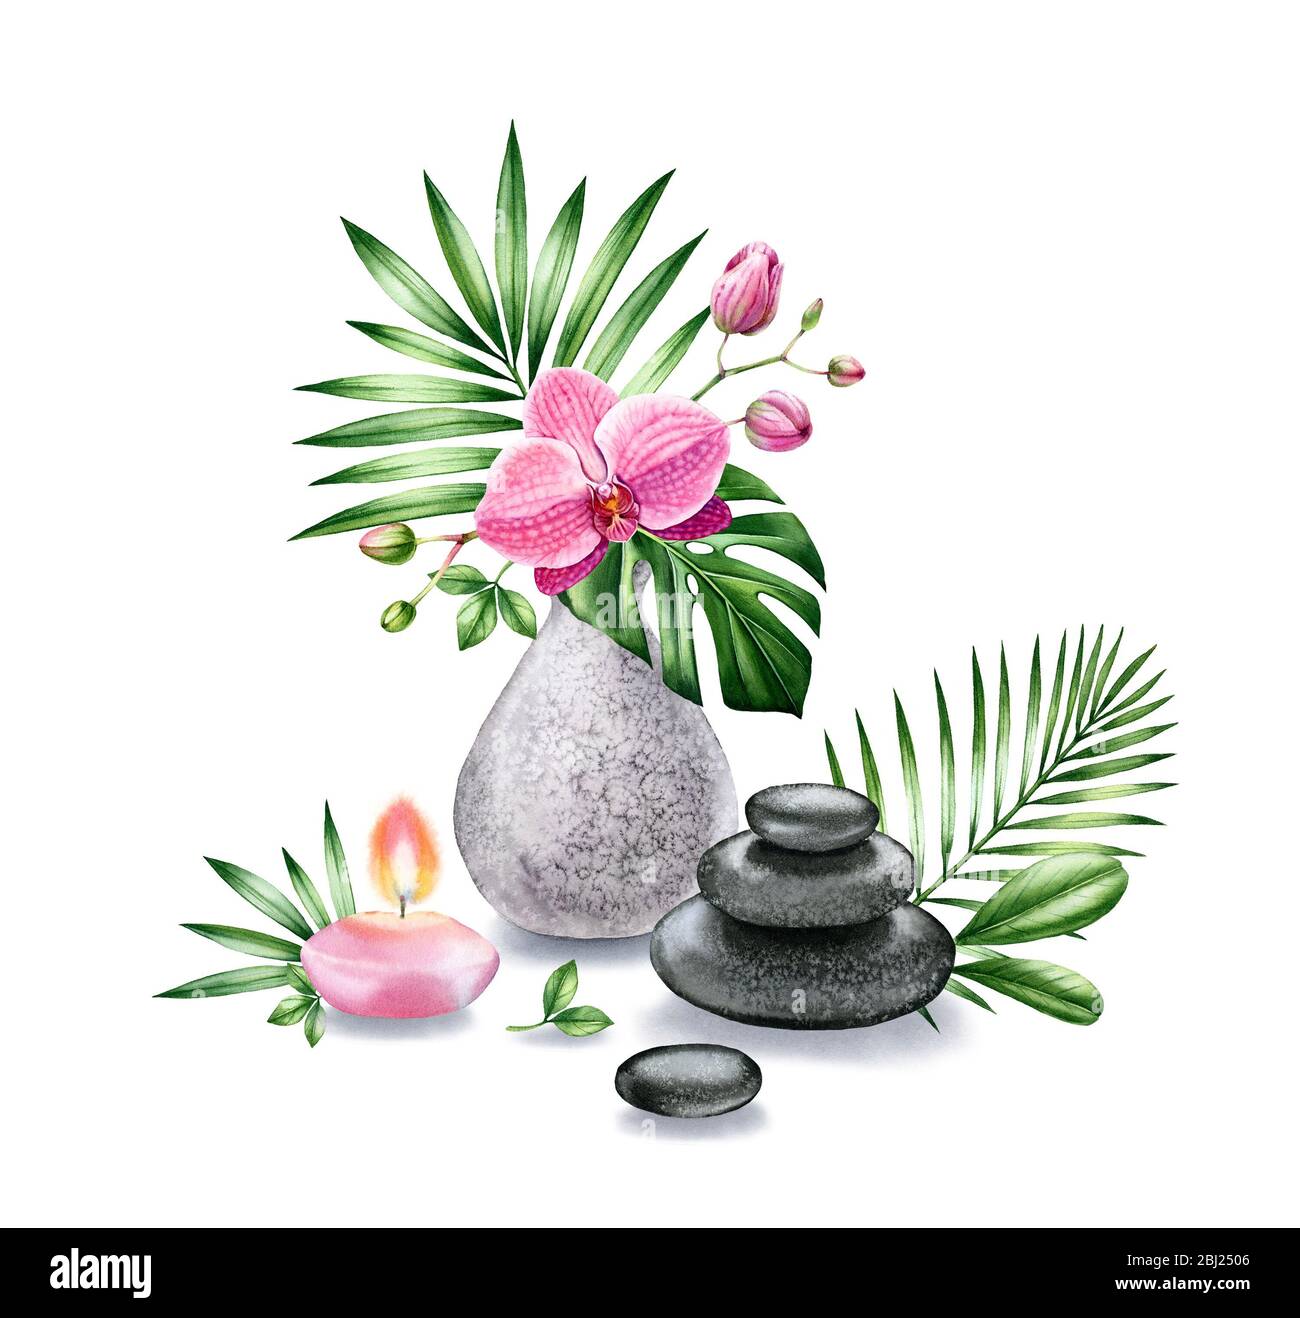 Watercolor vase with orchid, candle and spa stones. Tropical bouquet with flowers and palm leaves. Interior decoration of grey stone. Realistic Stock Photo